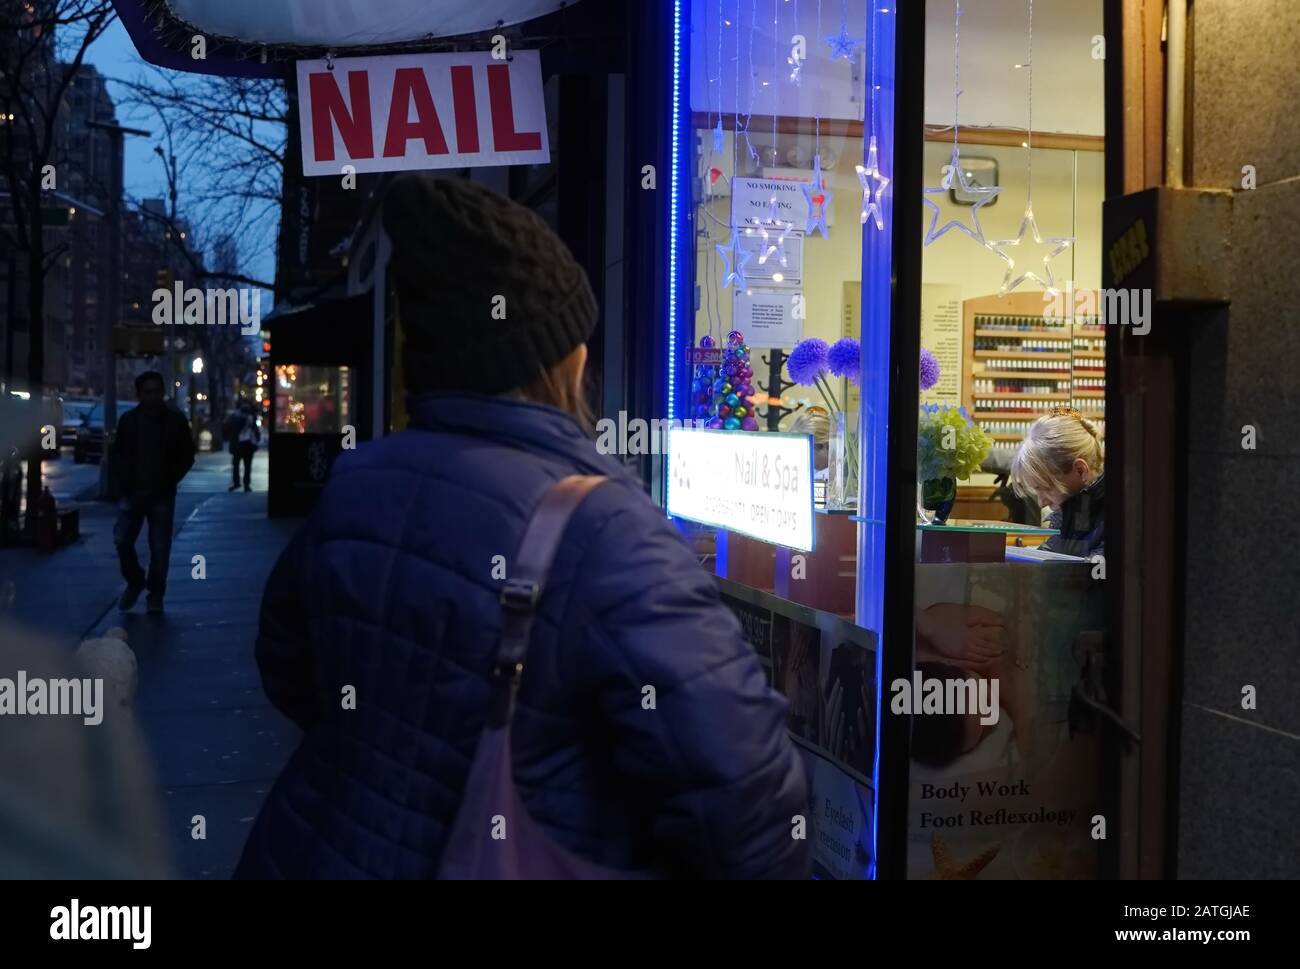 New York, NY / USA - December 29, 2019: Bundled woman prepares to treat herself and walk into a nail salon after work Stock Photo